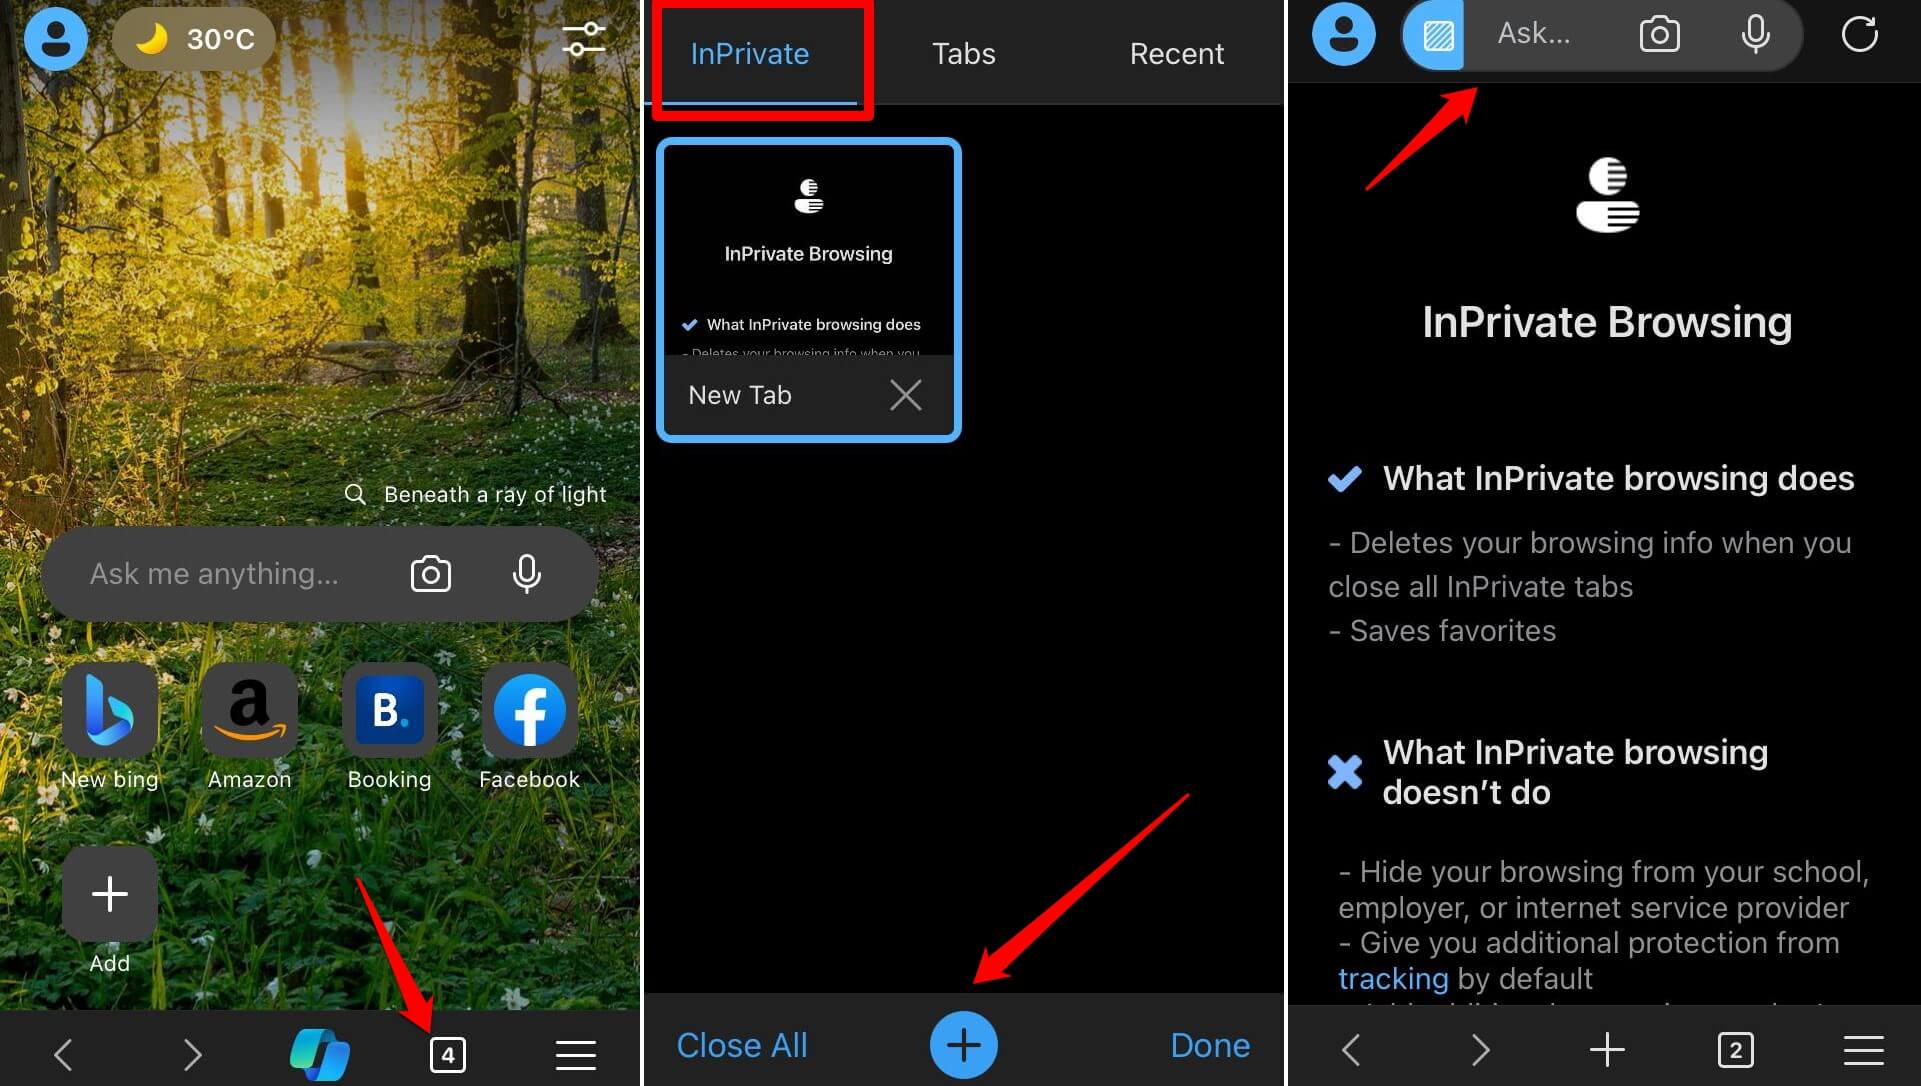 open a new tab in InPrivate mode in Edge on iPhone